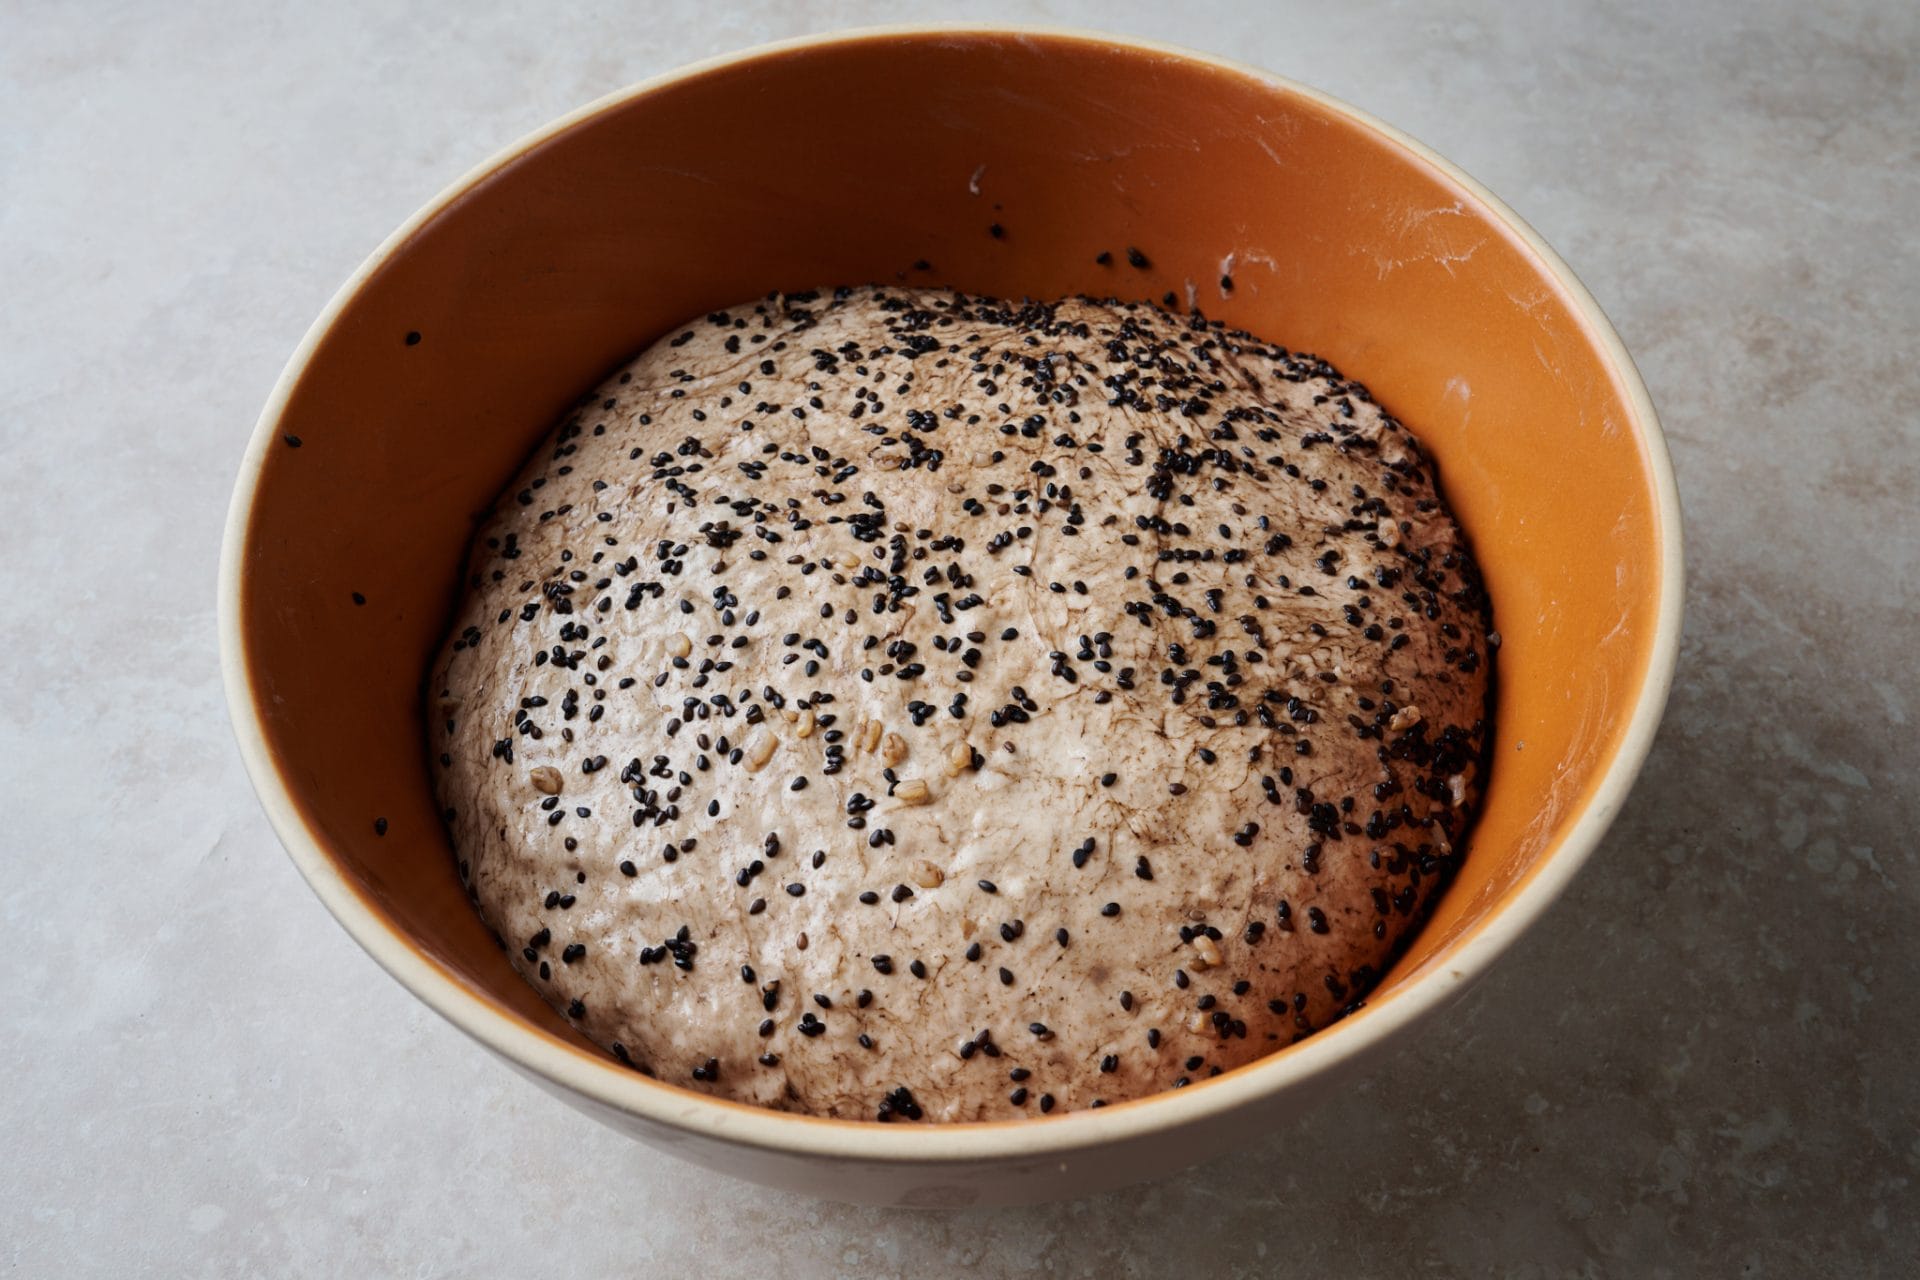 Dough with sesame and brown rice mix-ins added